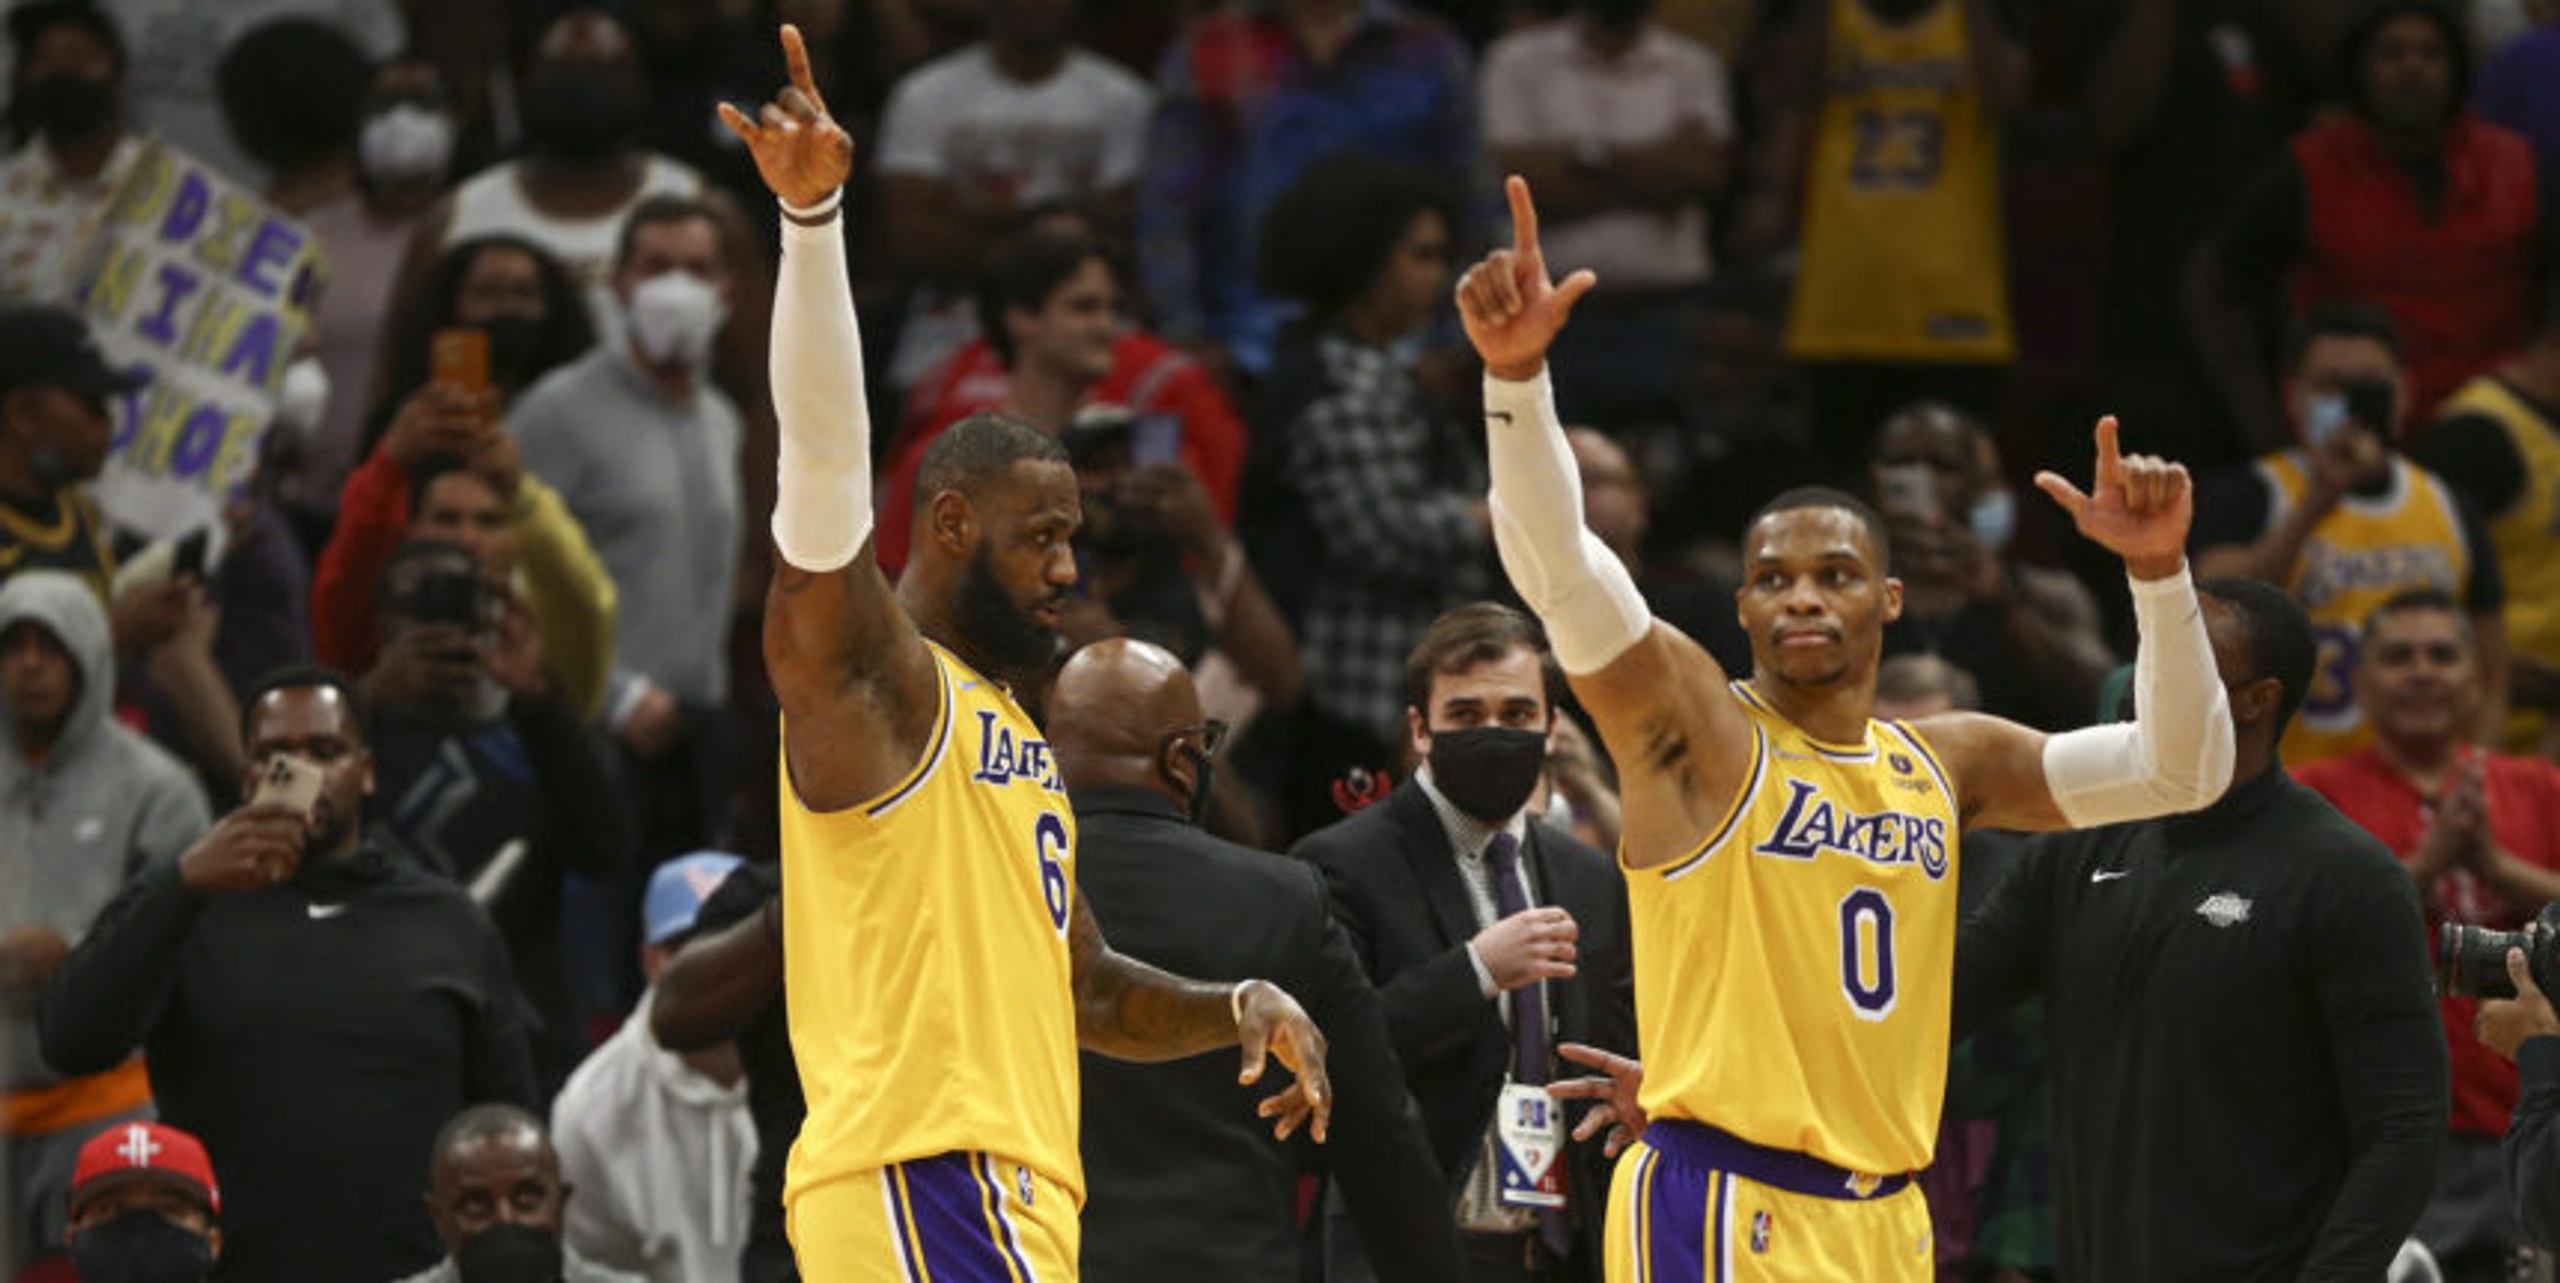 LeBron, Westbrook have triple-doubles, Lakers' skid ends at 5